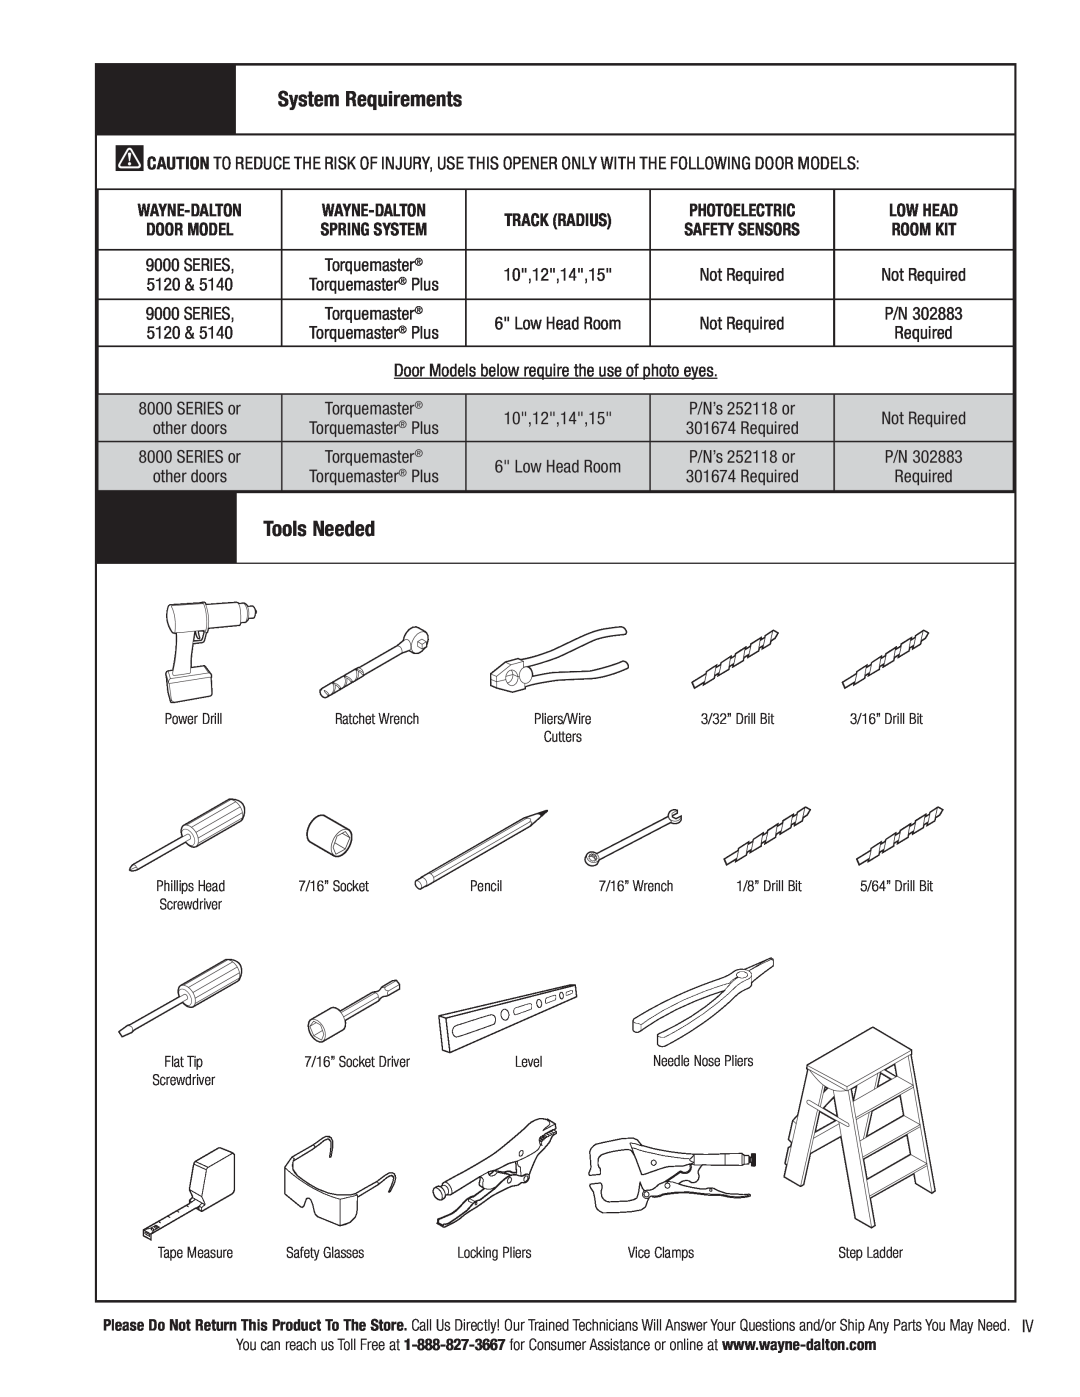 Wayne-Dalton 3790-Z installation instructions System Requirements, Tools Needed 